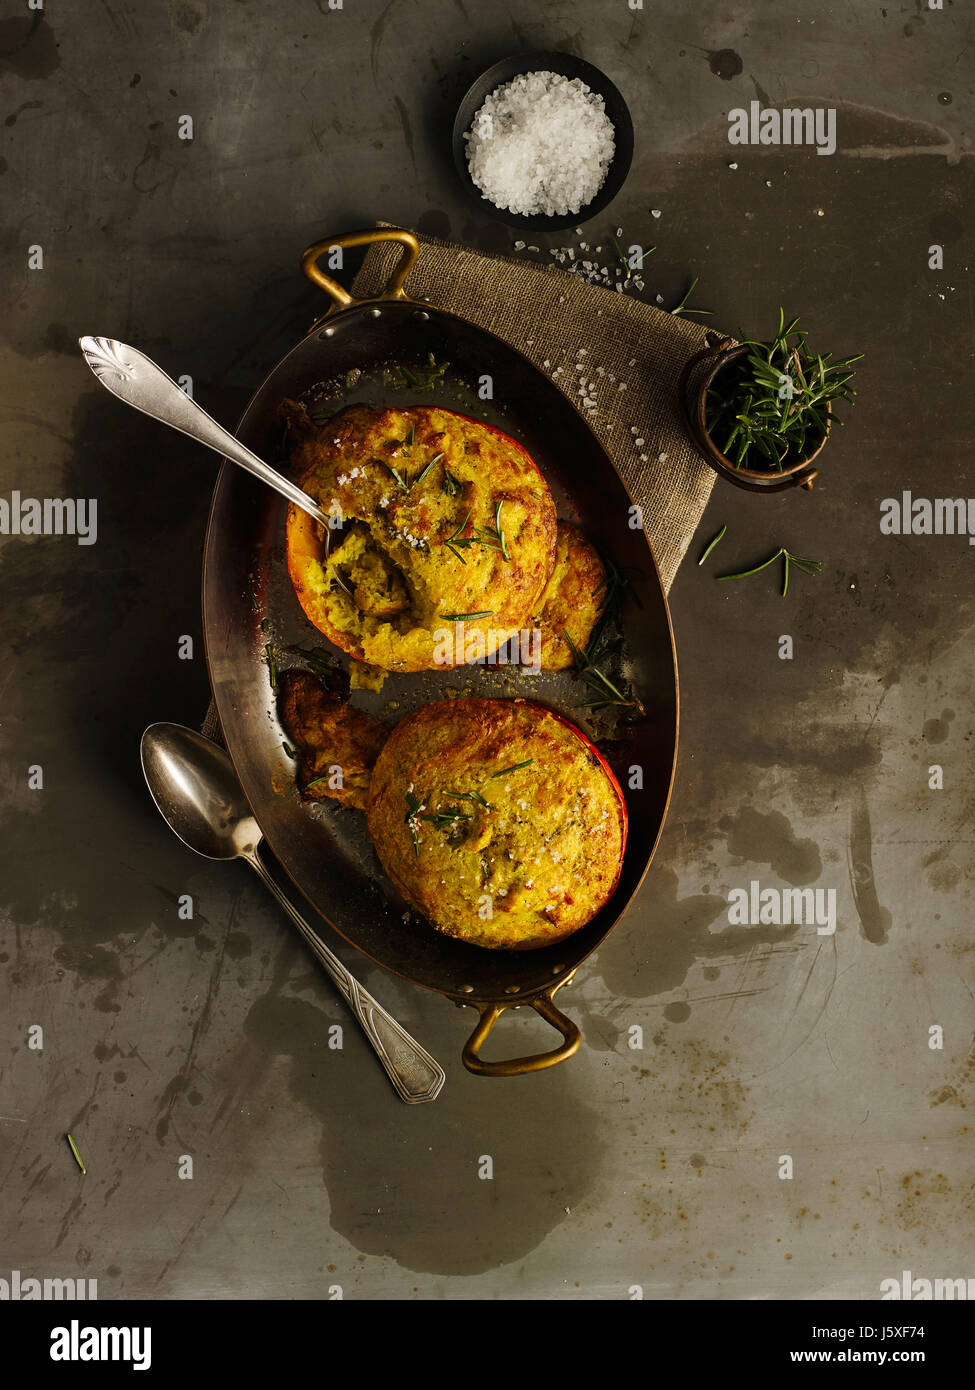 Filled pumpkin with parmesan and herbs Stock Photo